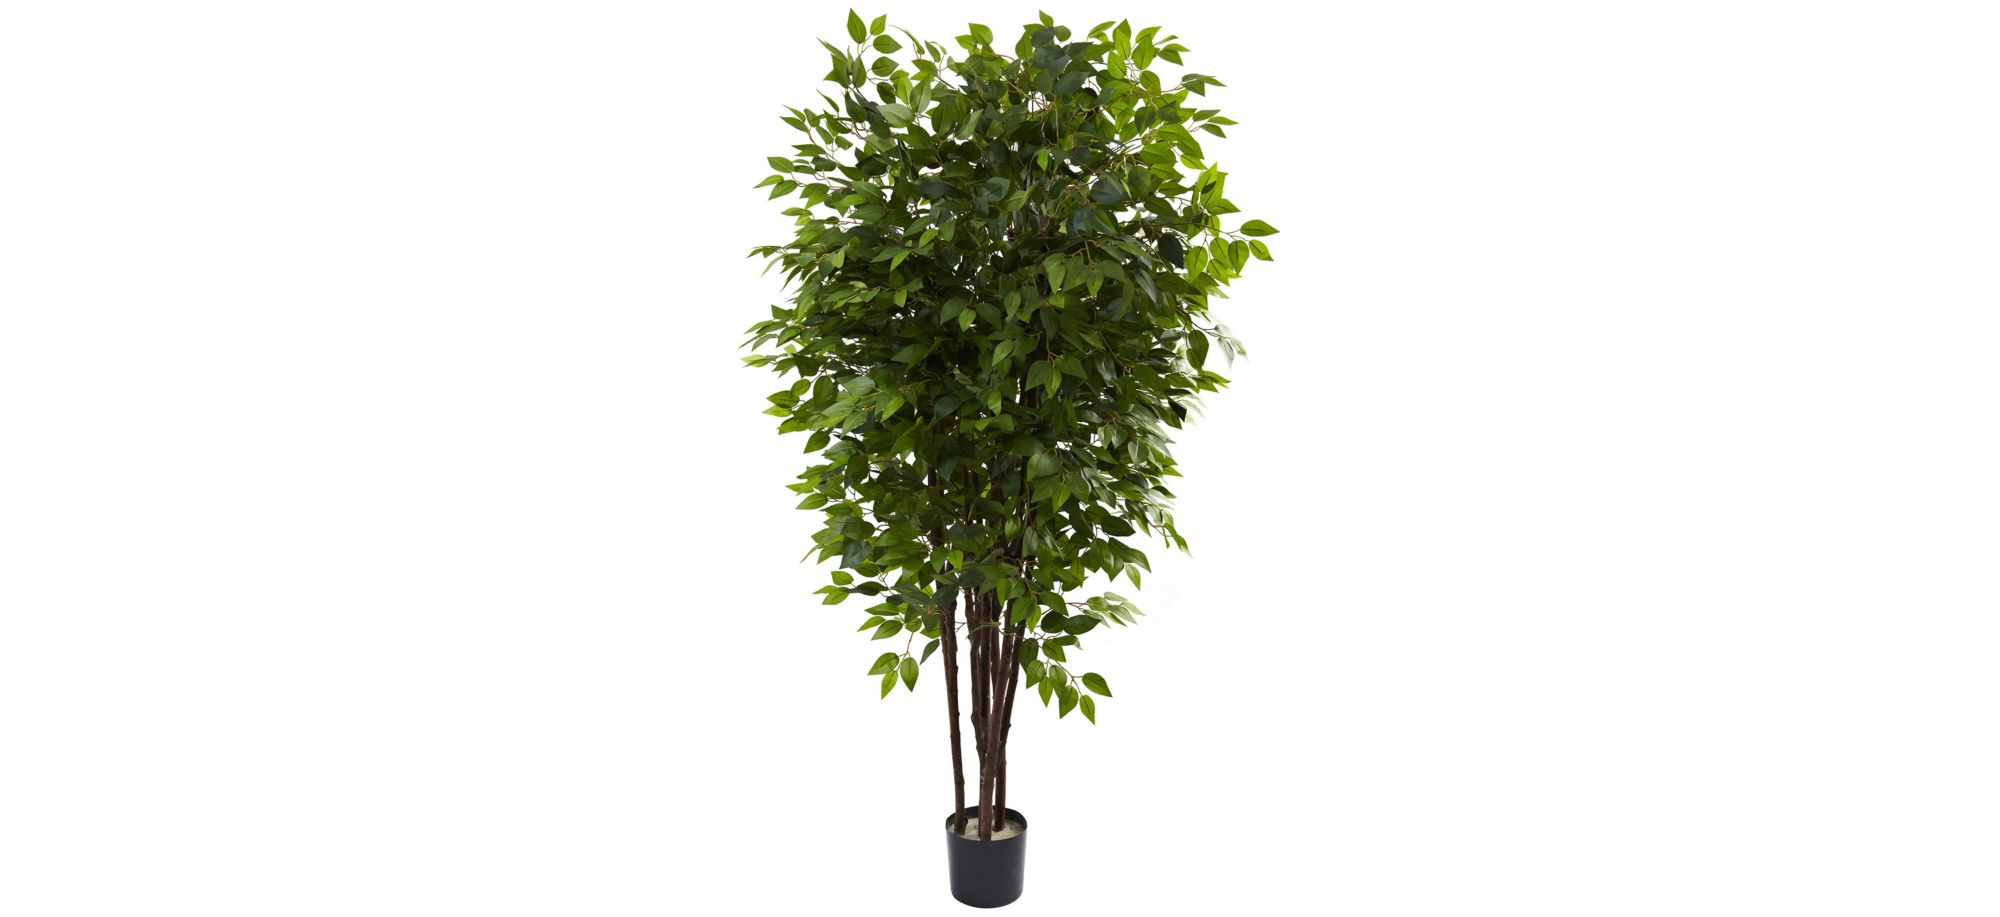 Deluxe Ficus Artificial Tree in Green by Bellanest